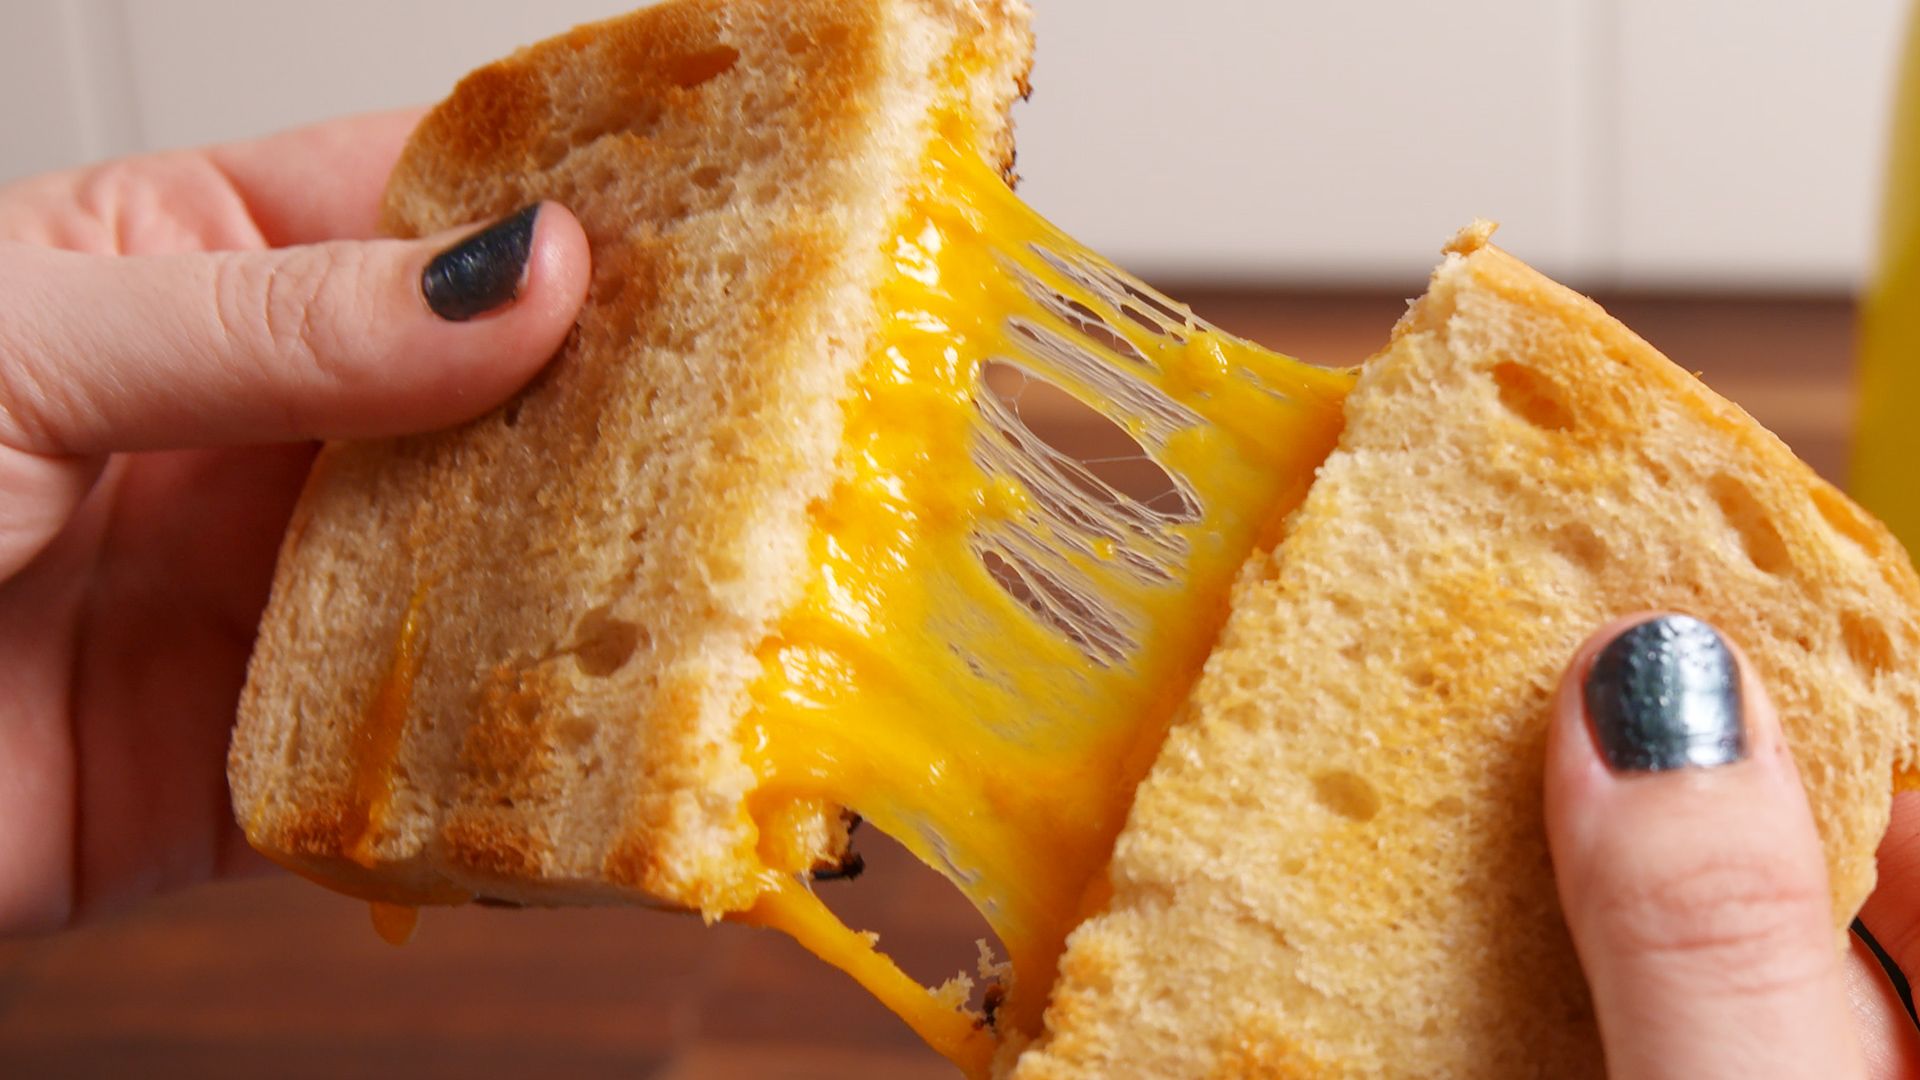 Grilled Cheese Toaster @